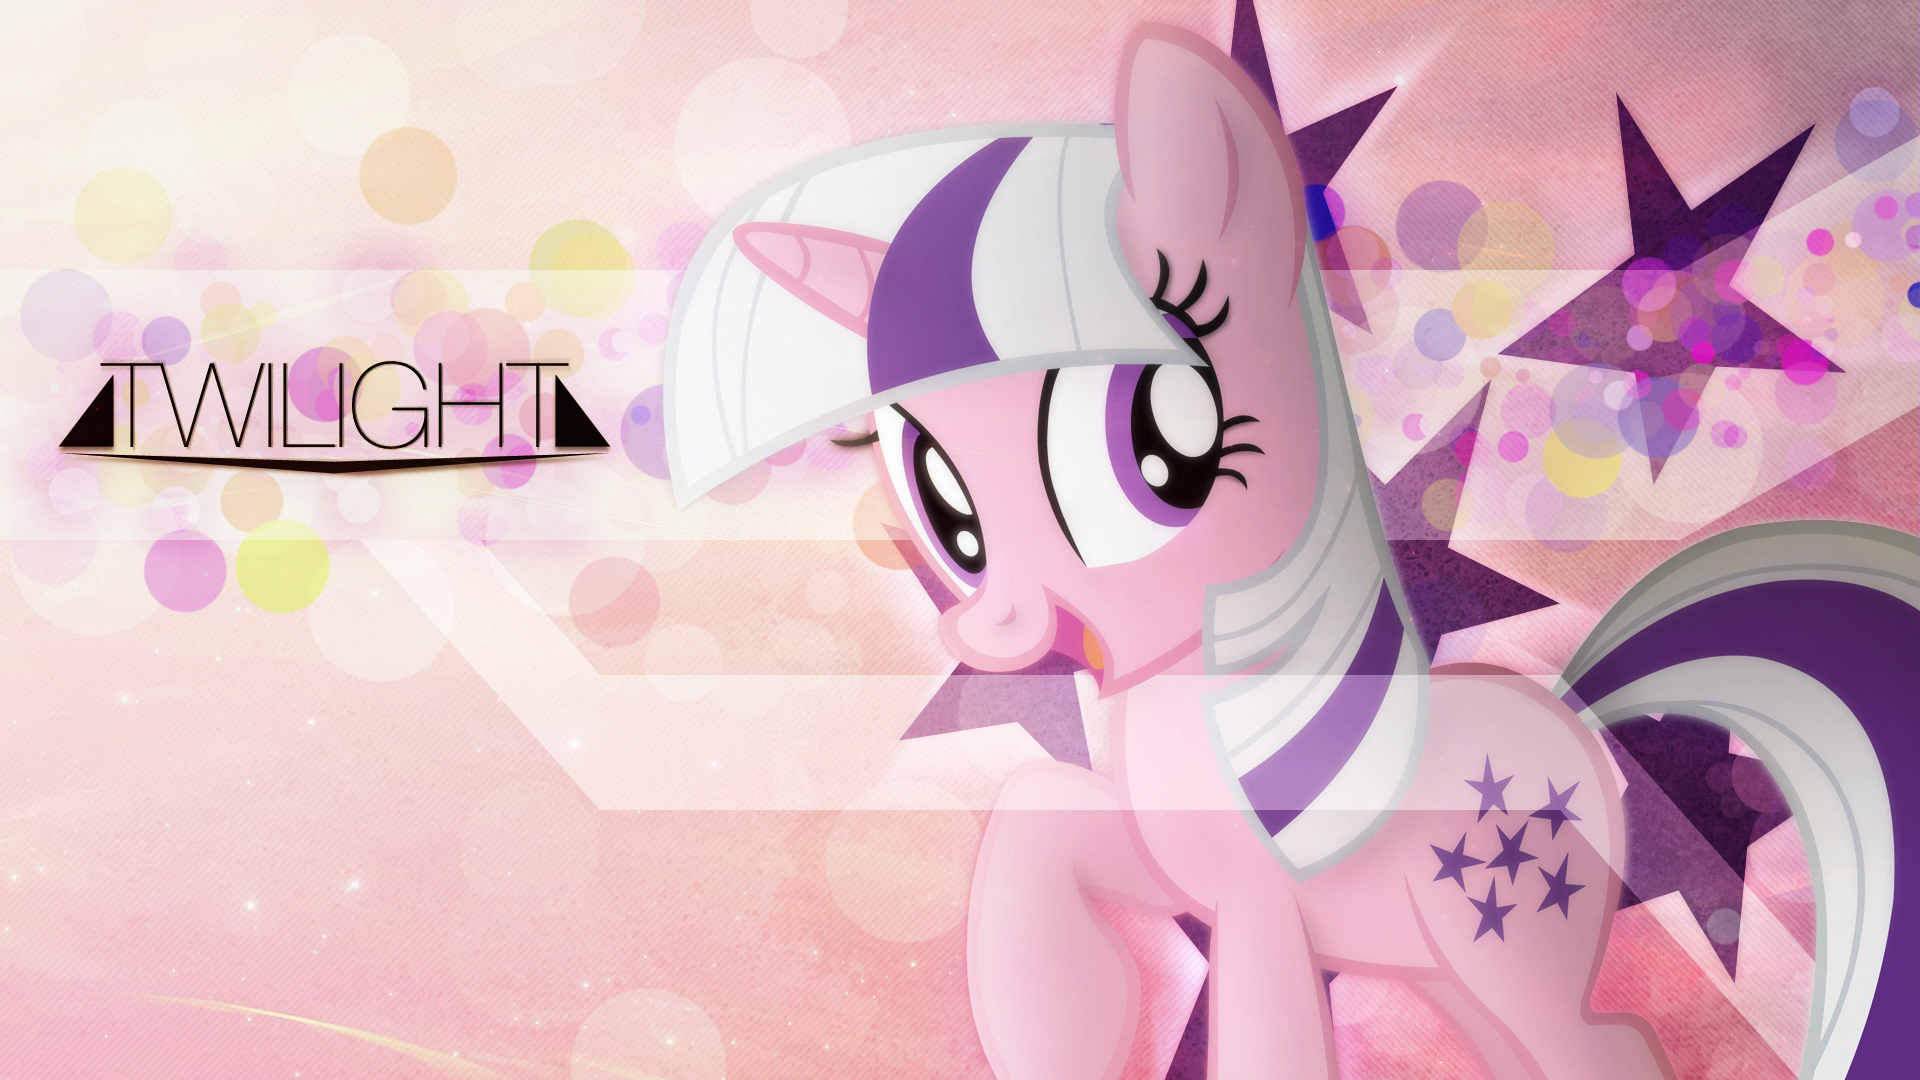 Twilight's Magic {Collab with Mackaged} by Doctor-G, KibbieTheGreat and Mackaged